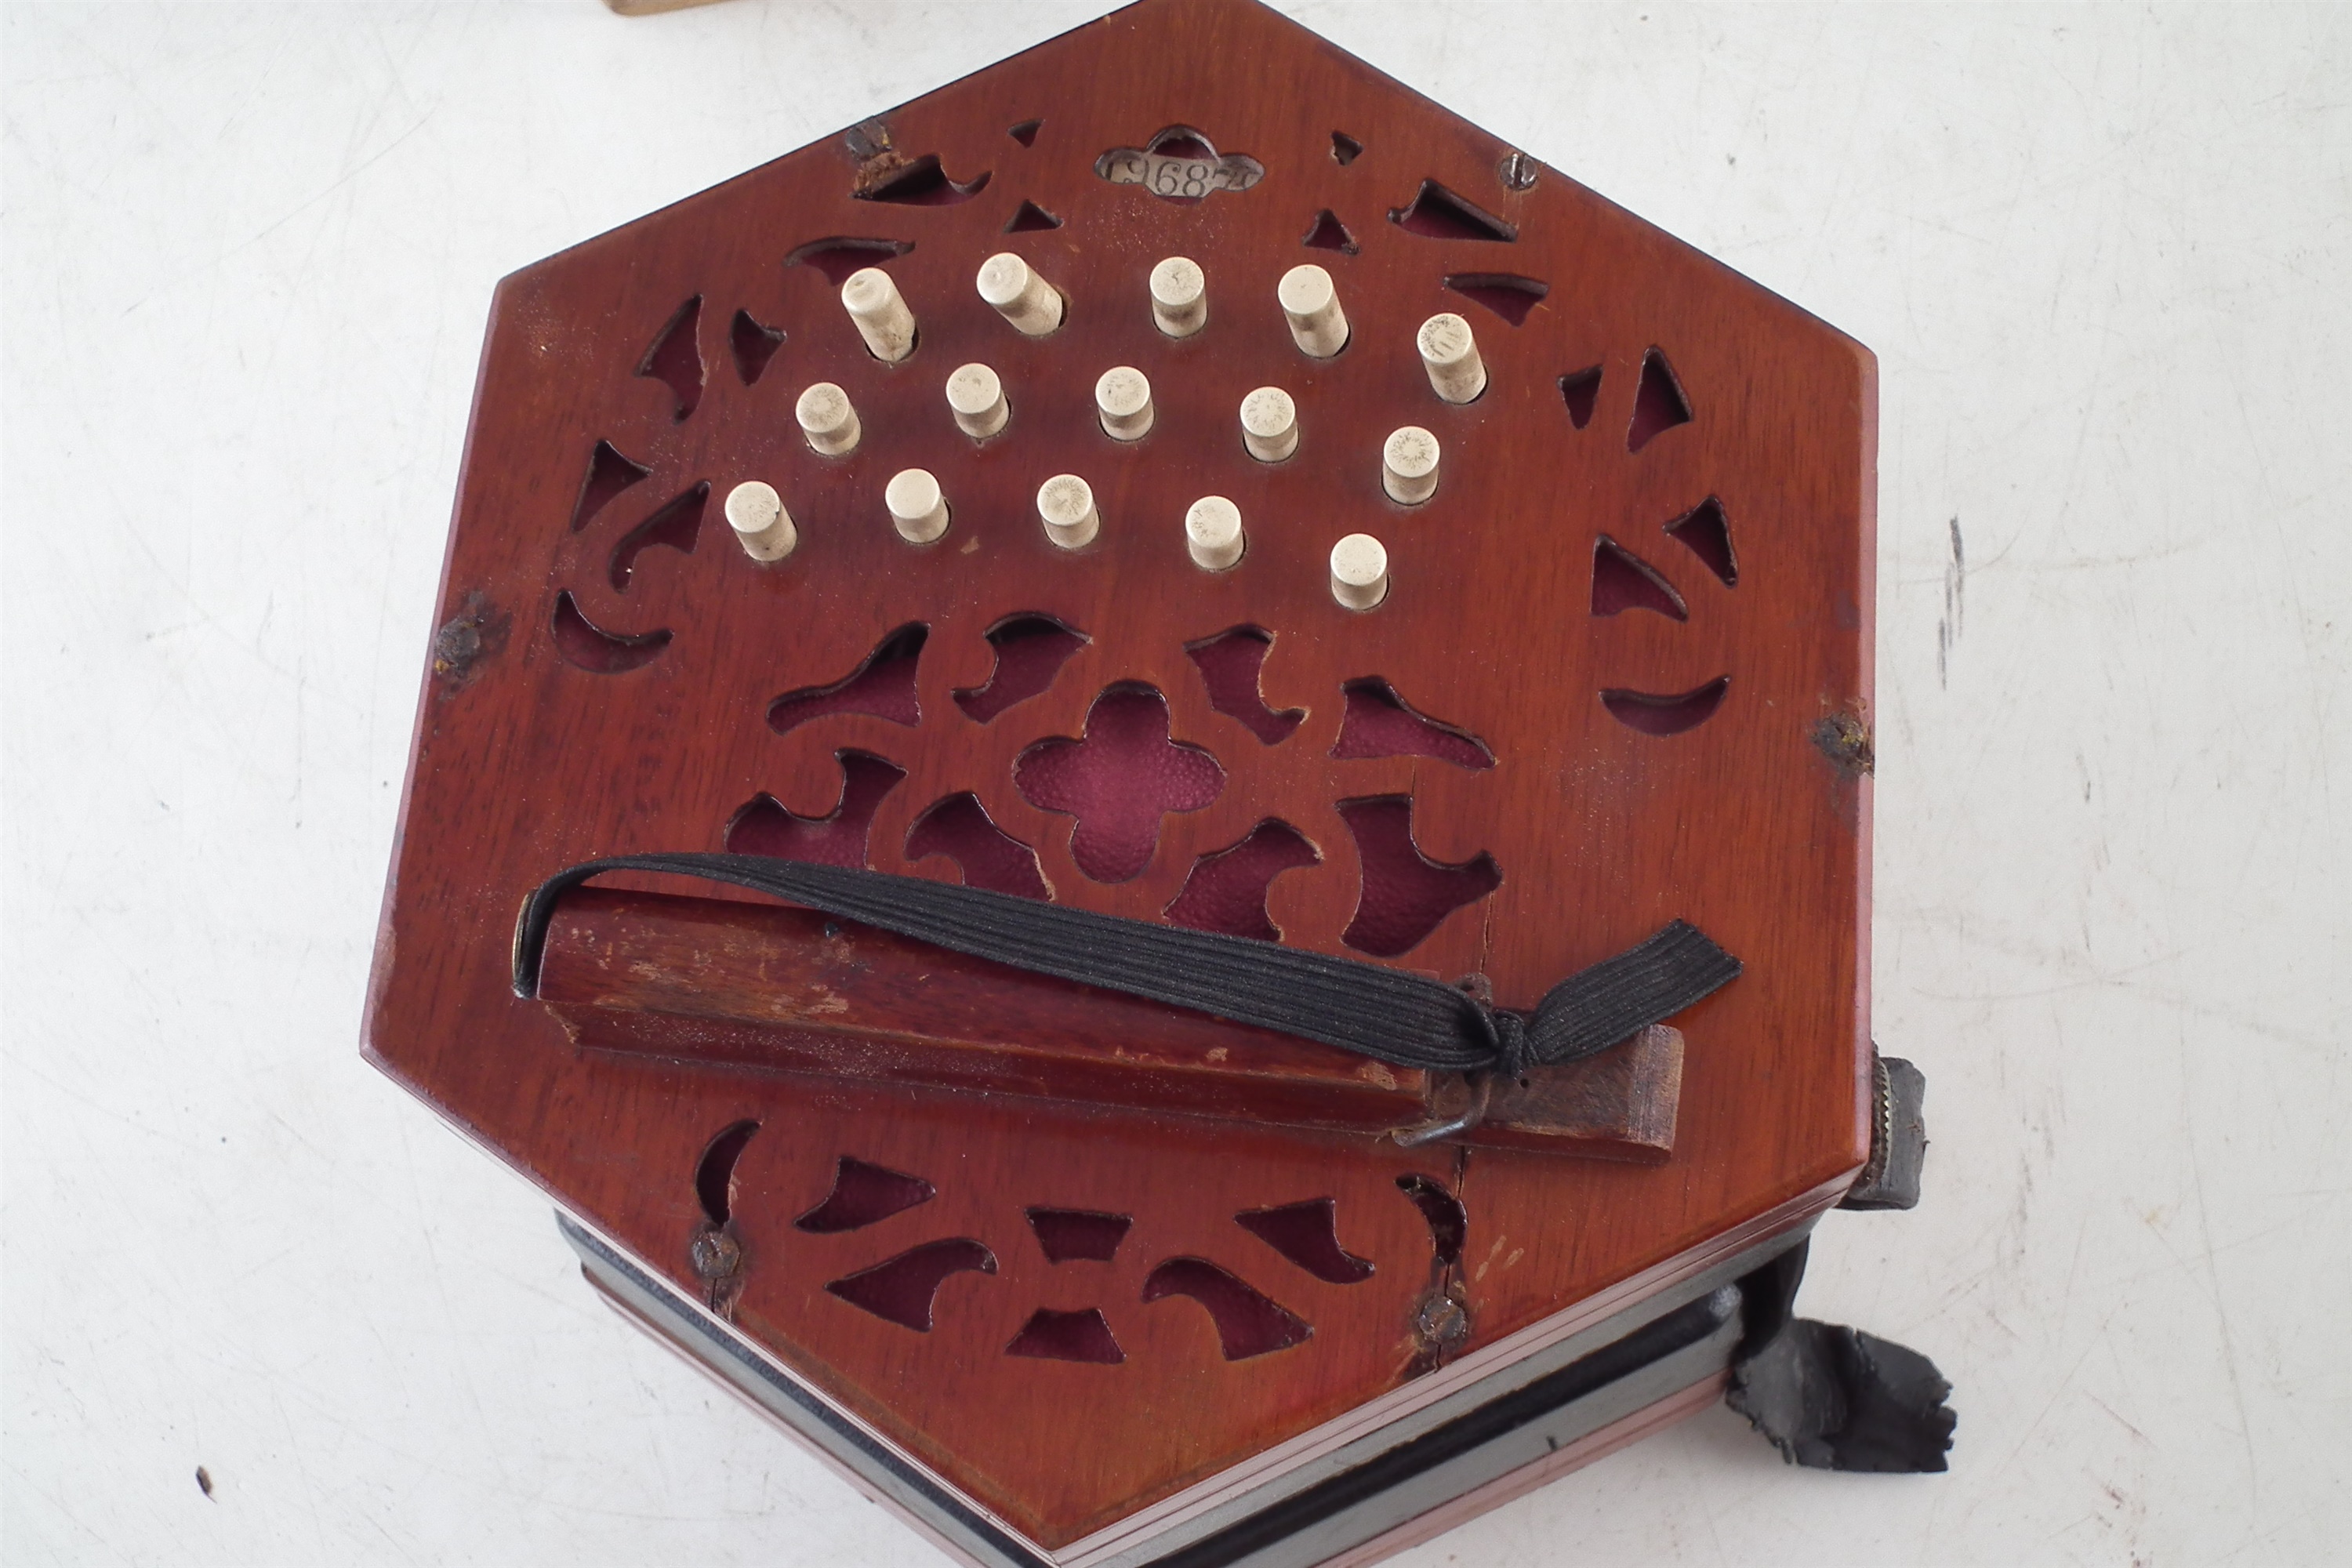 Lachenal 30 key concertina with case - Image 5 of 8